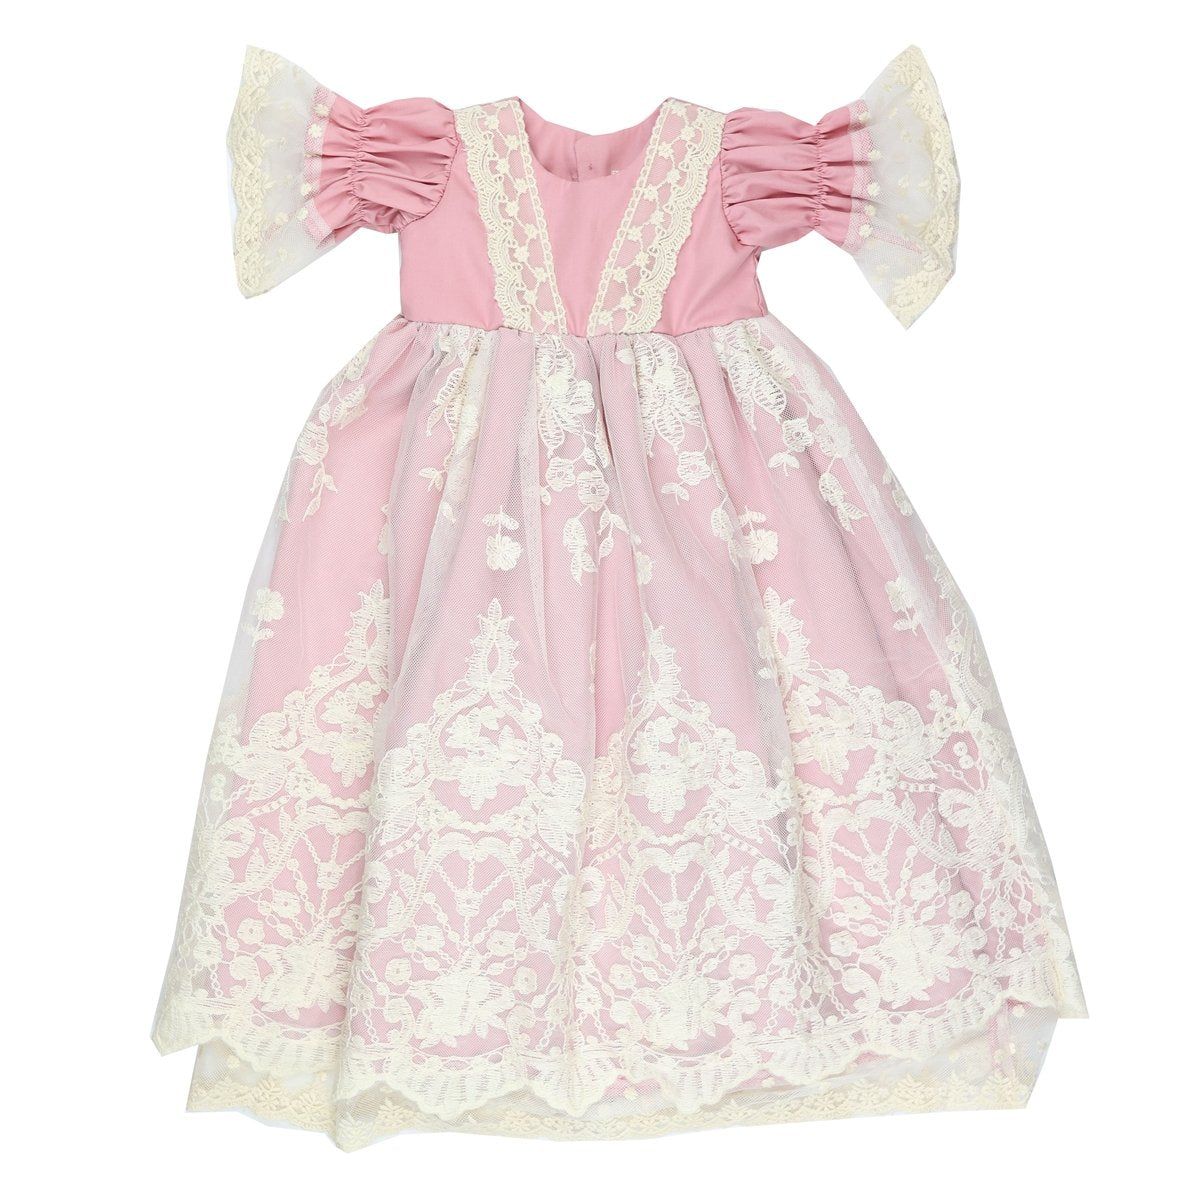 Rose and Ivory Lace Infant Gown